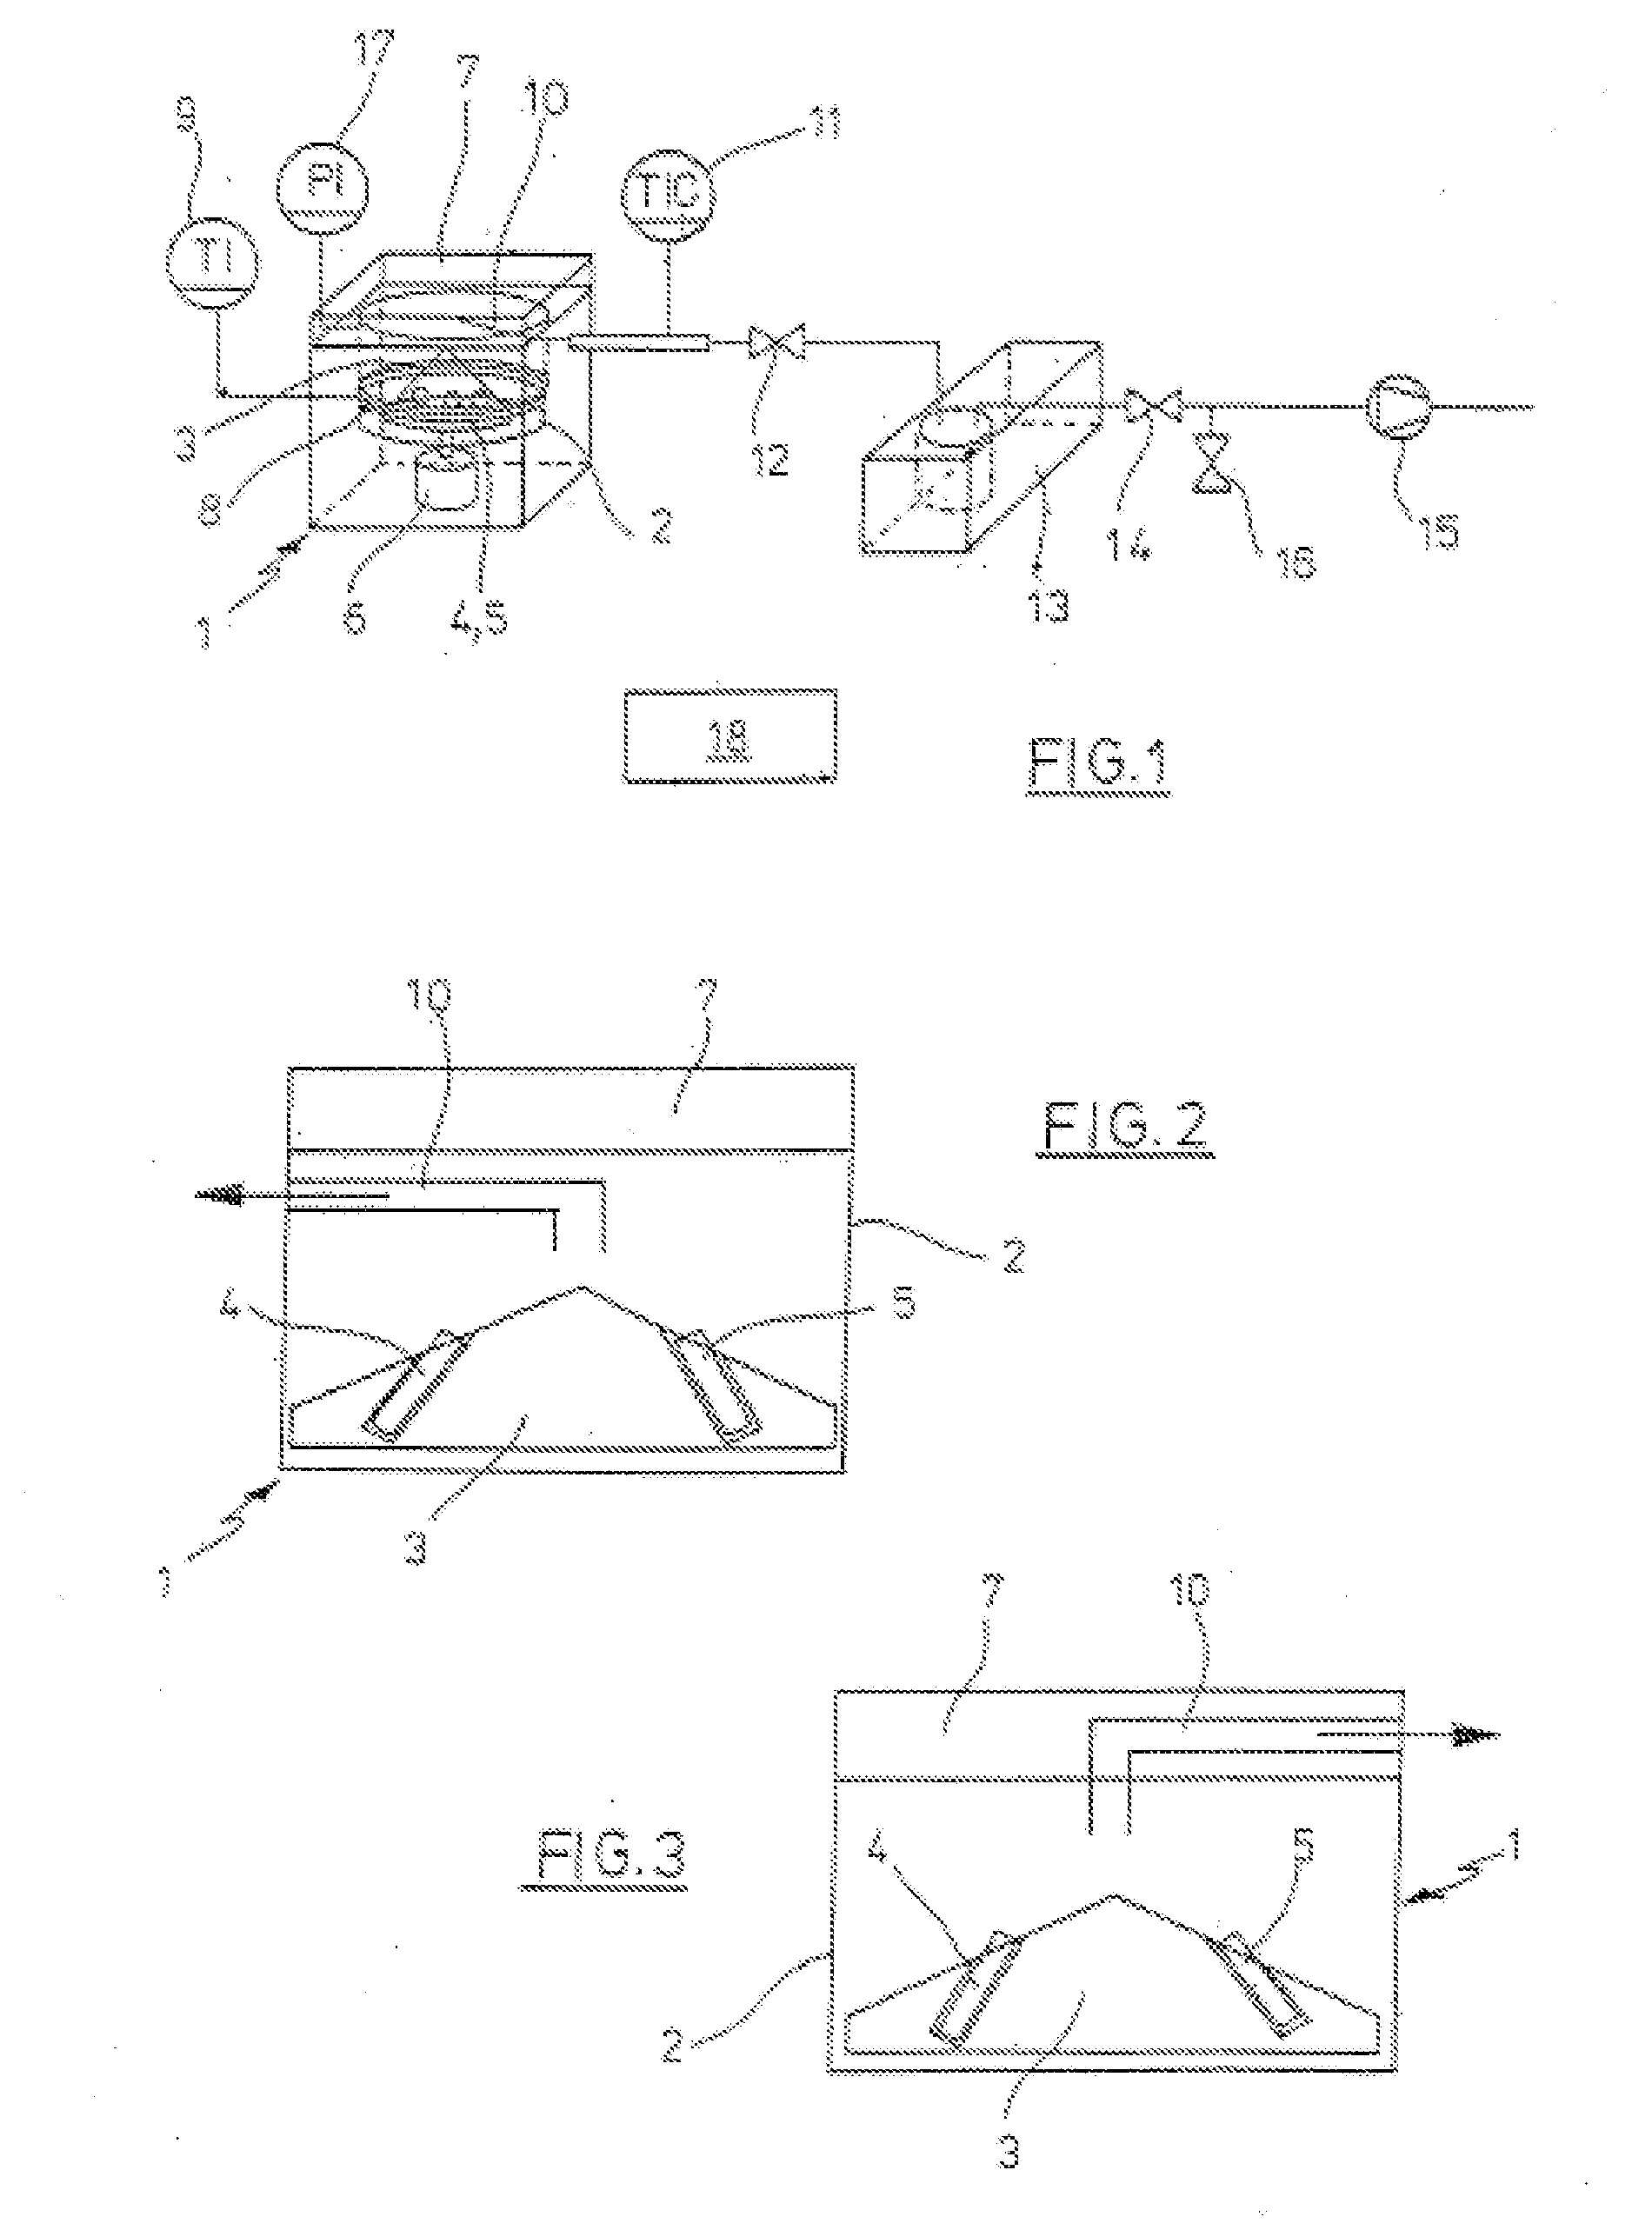 Method for vacuum concentration